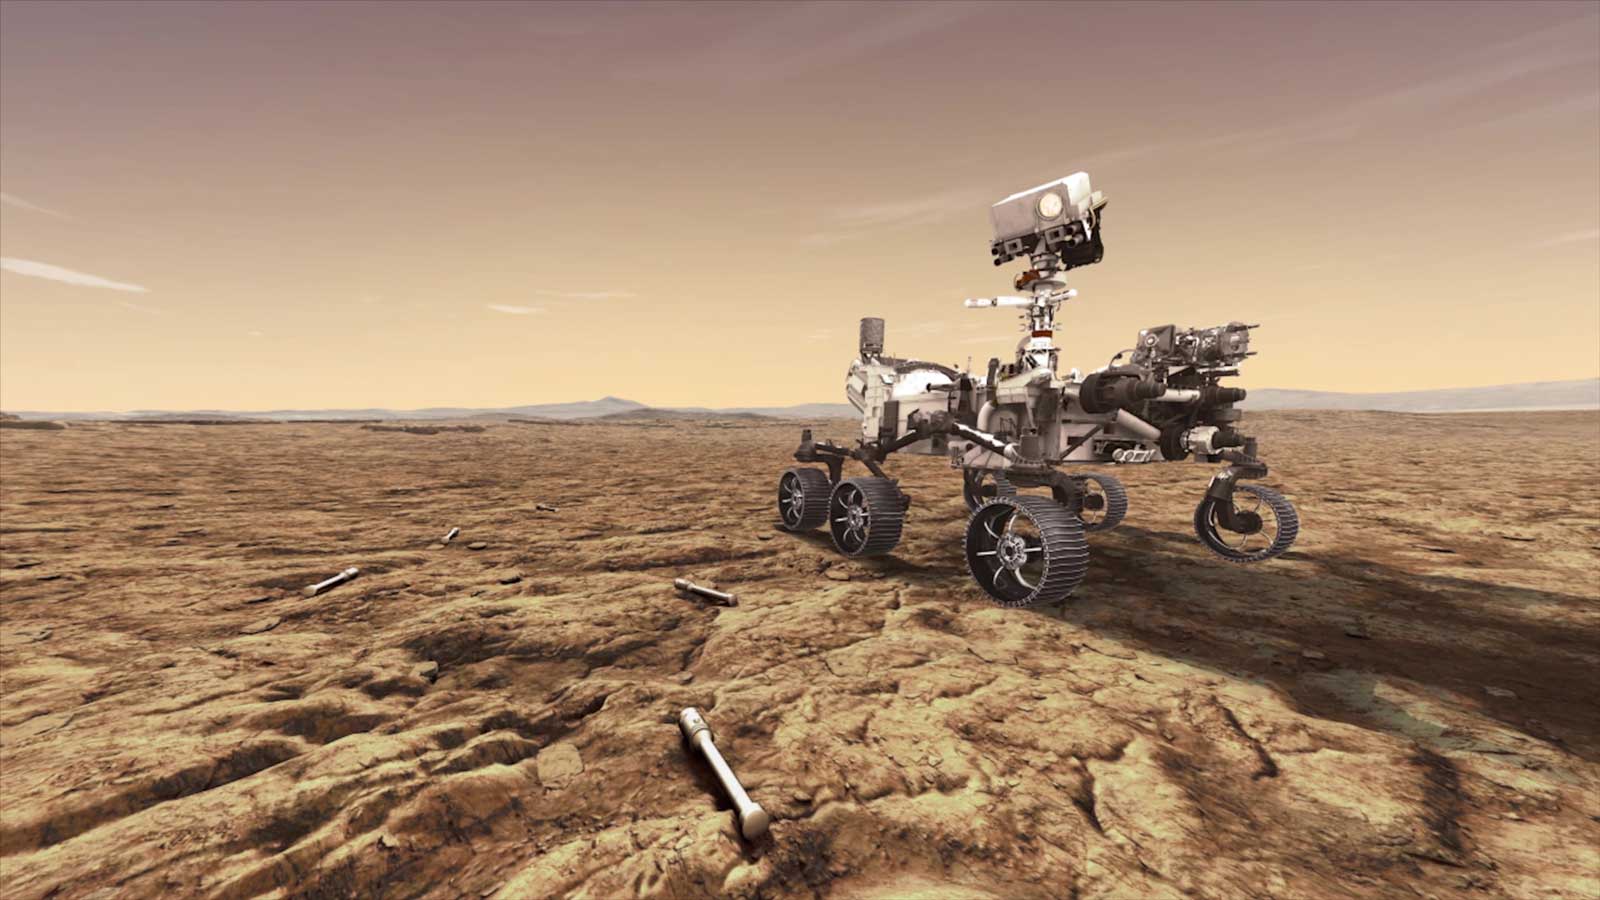 Rendering of the Perseverance rover on Mars.